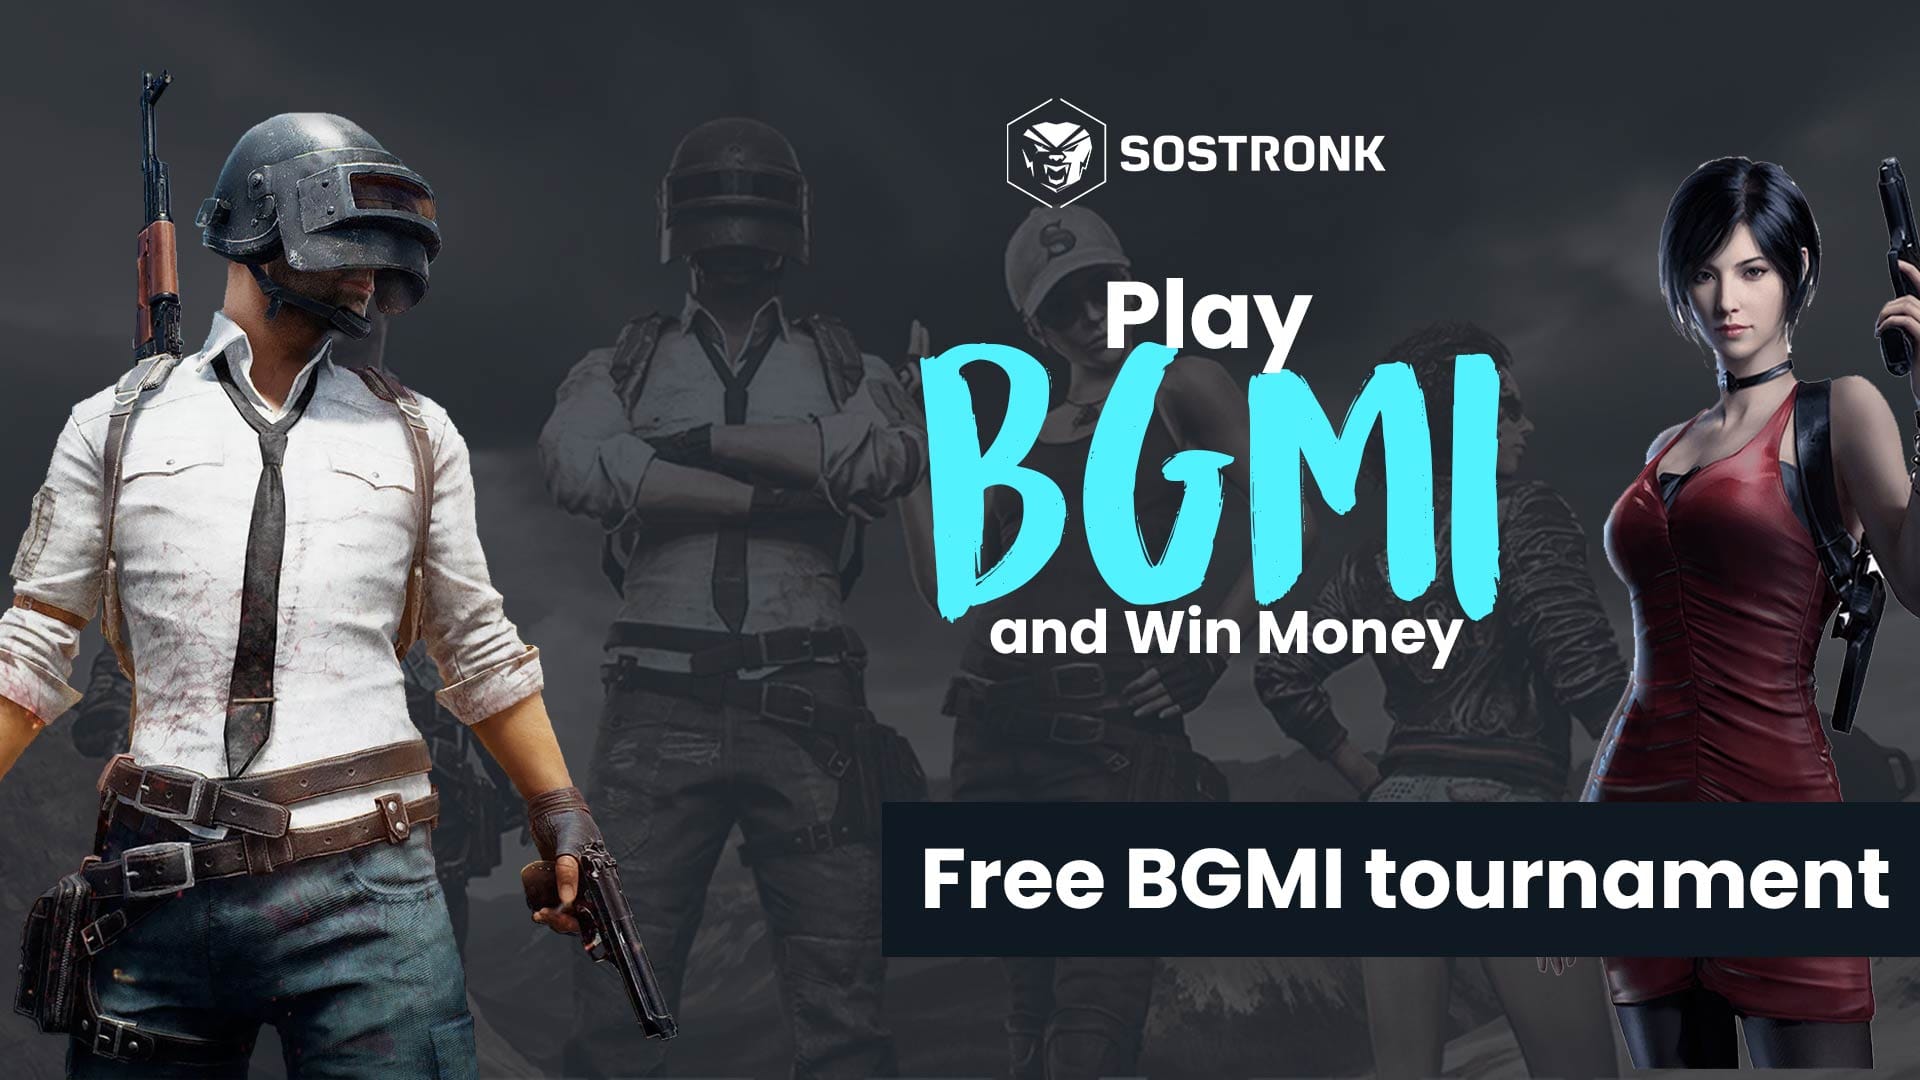 BGMI Tournaments with Free Entry